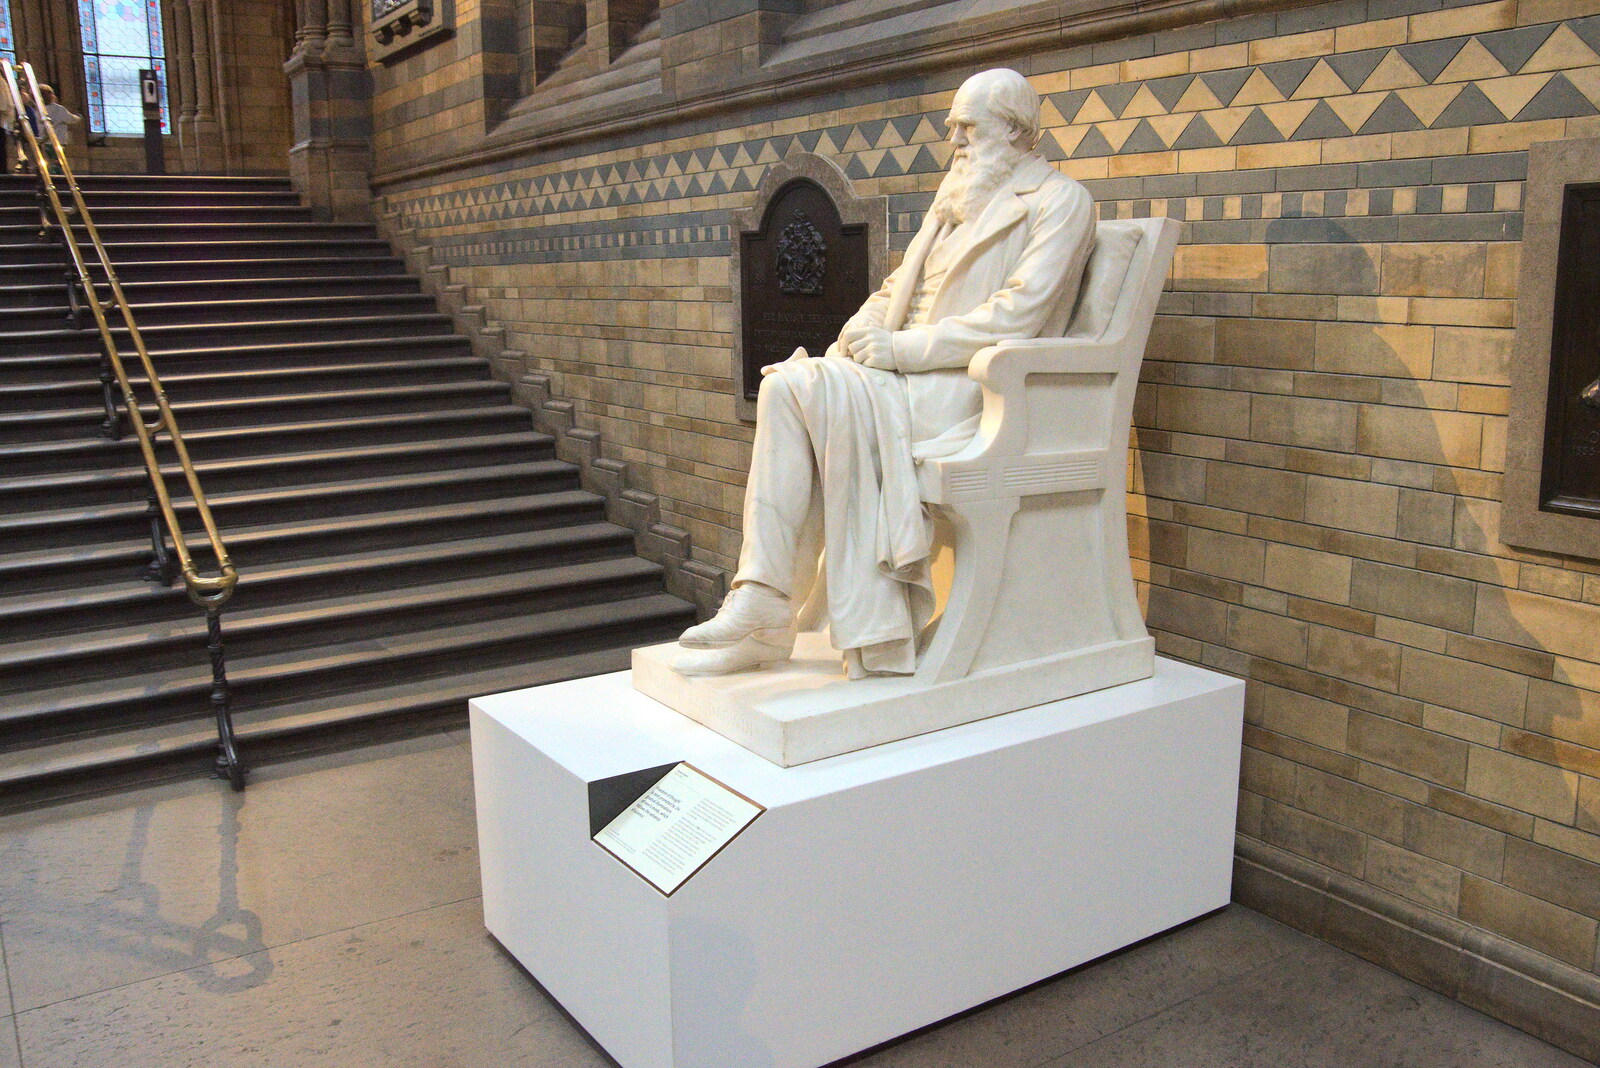 Charles Darwin looks out onto the heaving masses from A Trip to the Natural History Museum, Kensington, London - 15th January 2022